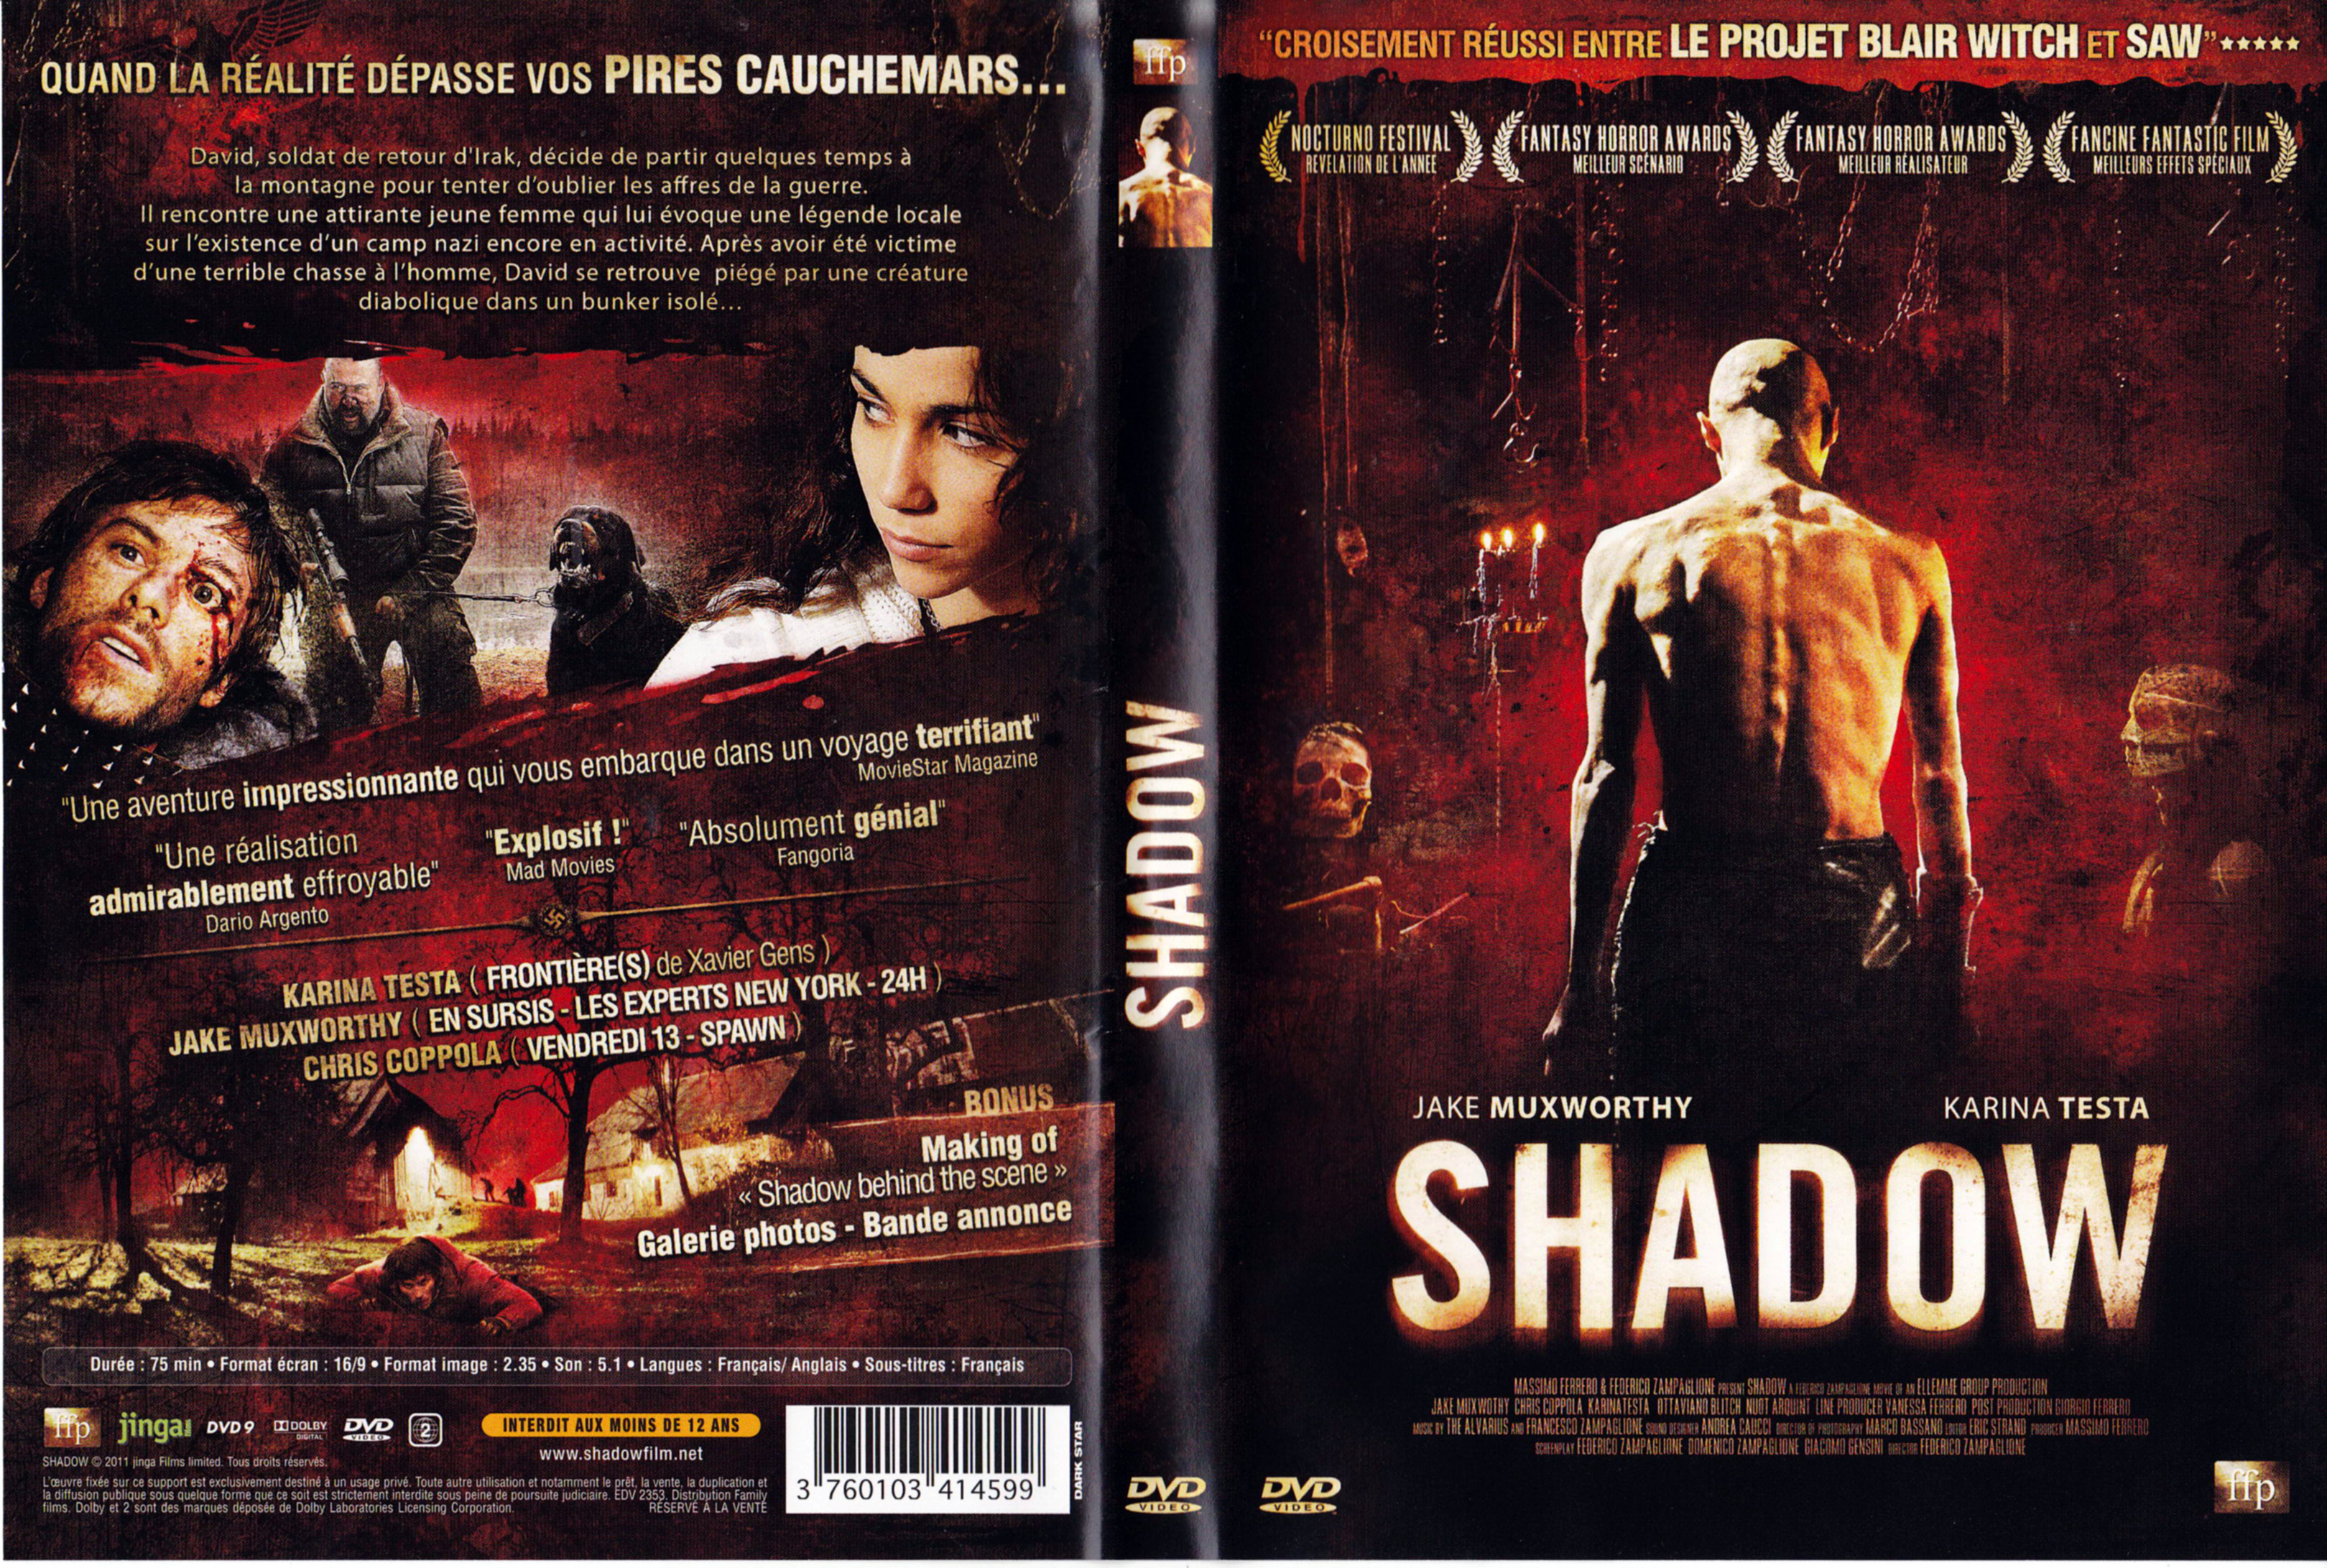 Jaquette DVD Shadow